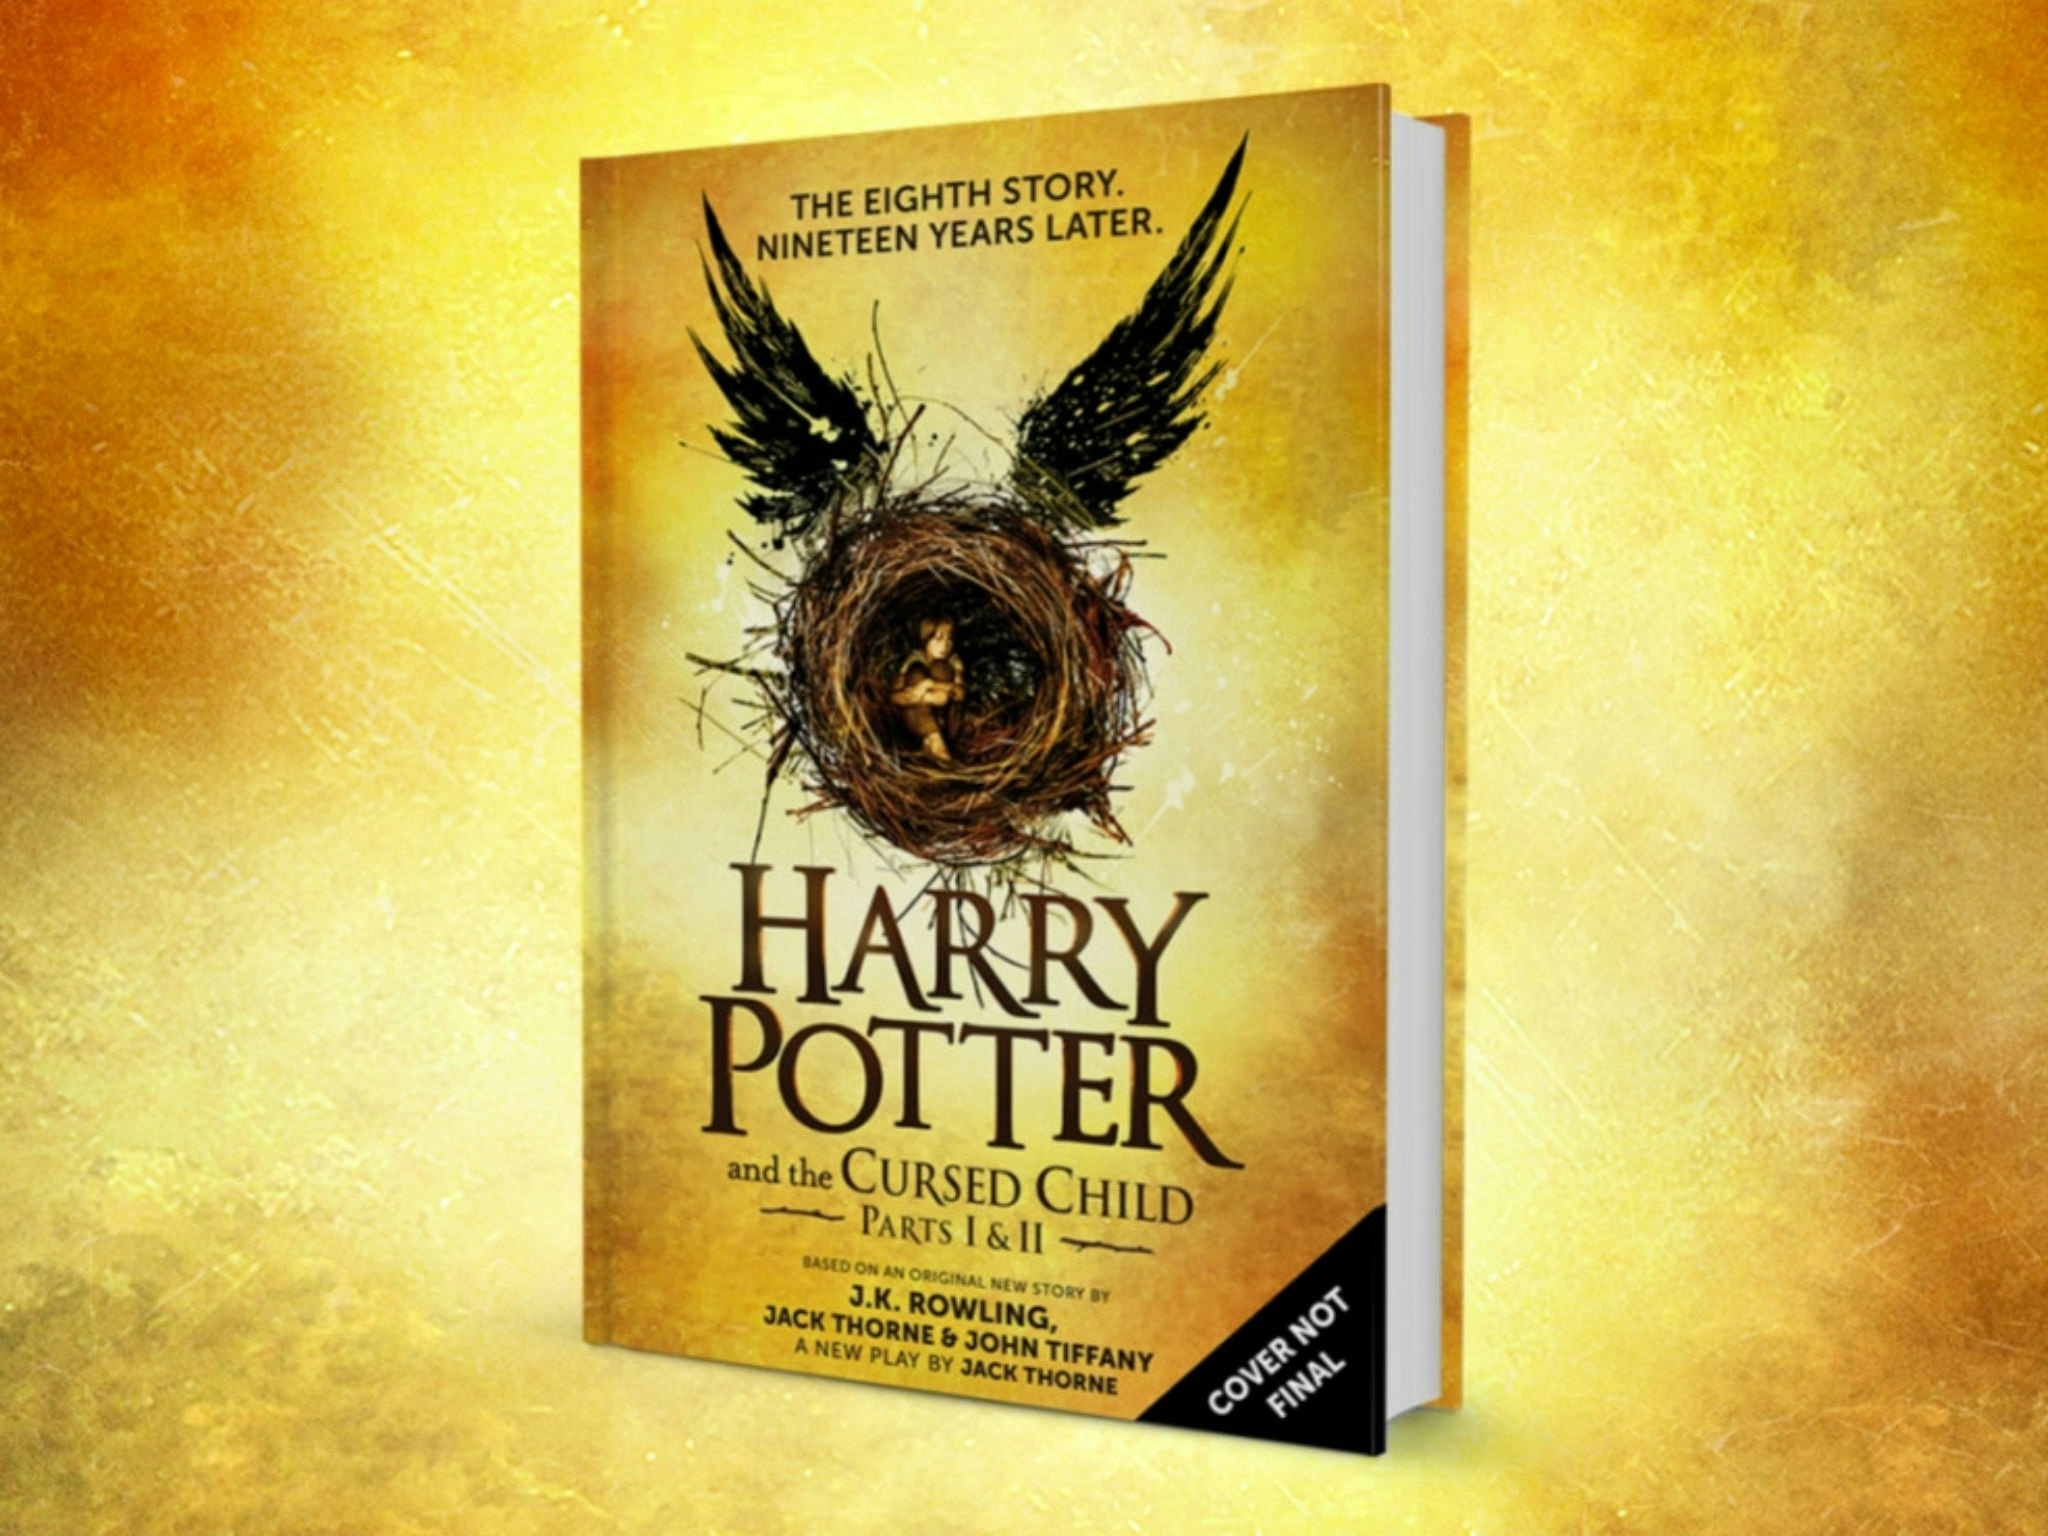 Harry Potter and the Cursed Child by J.K. Rowling